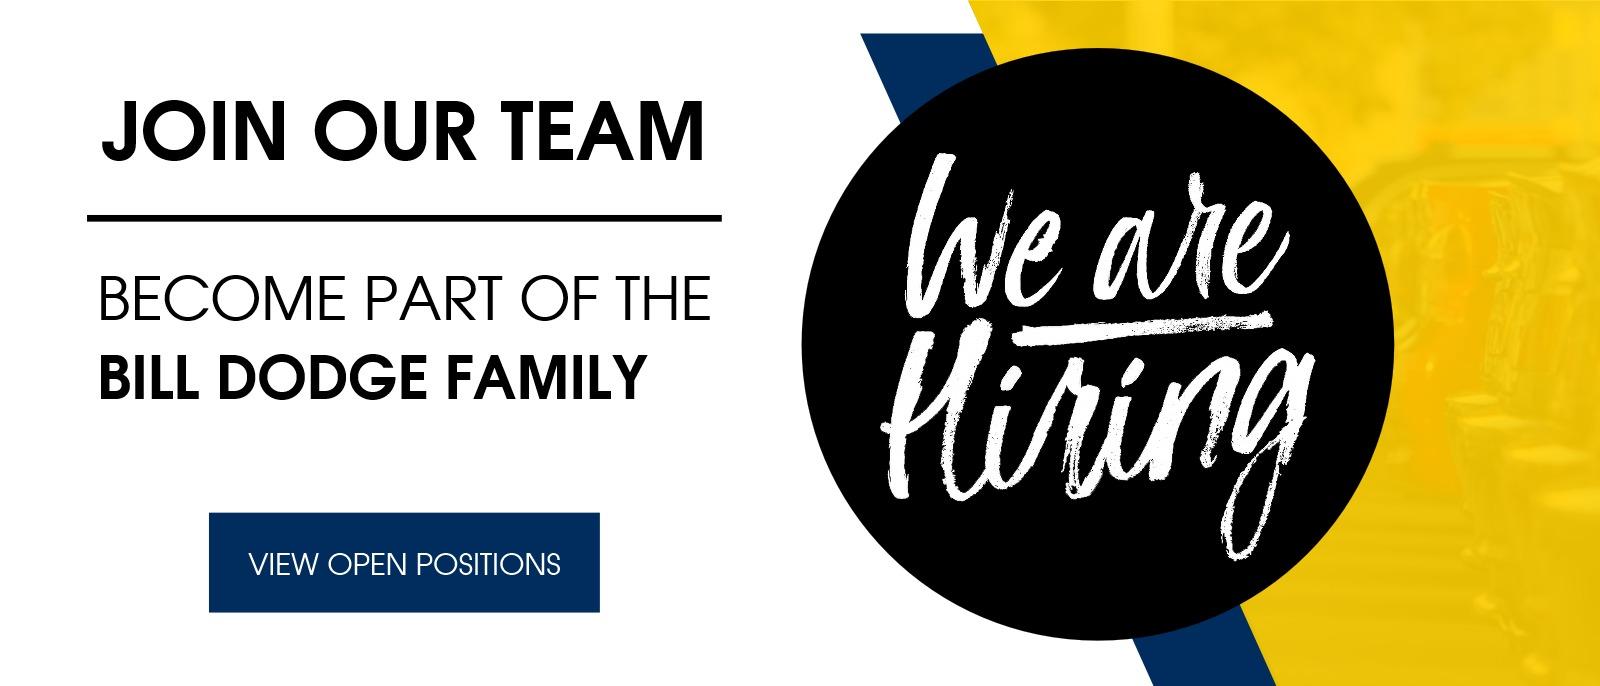 We are Hiring
Join Our Team!
Become part of the Bill Dodge family
View Open Positions